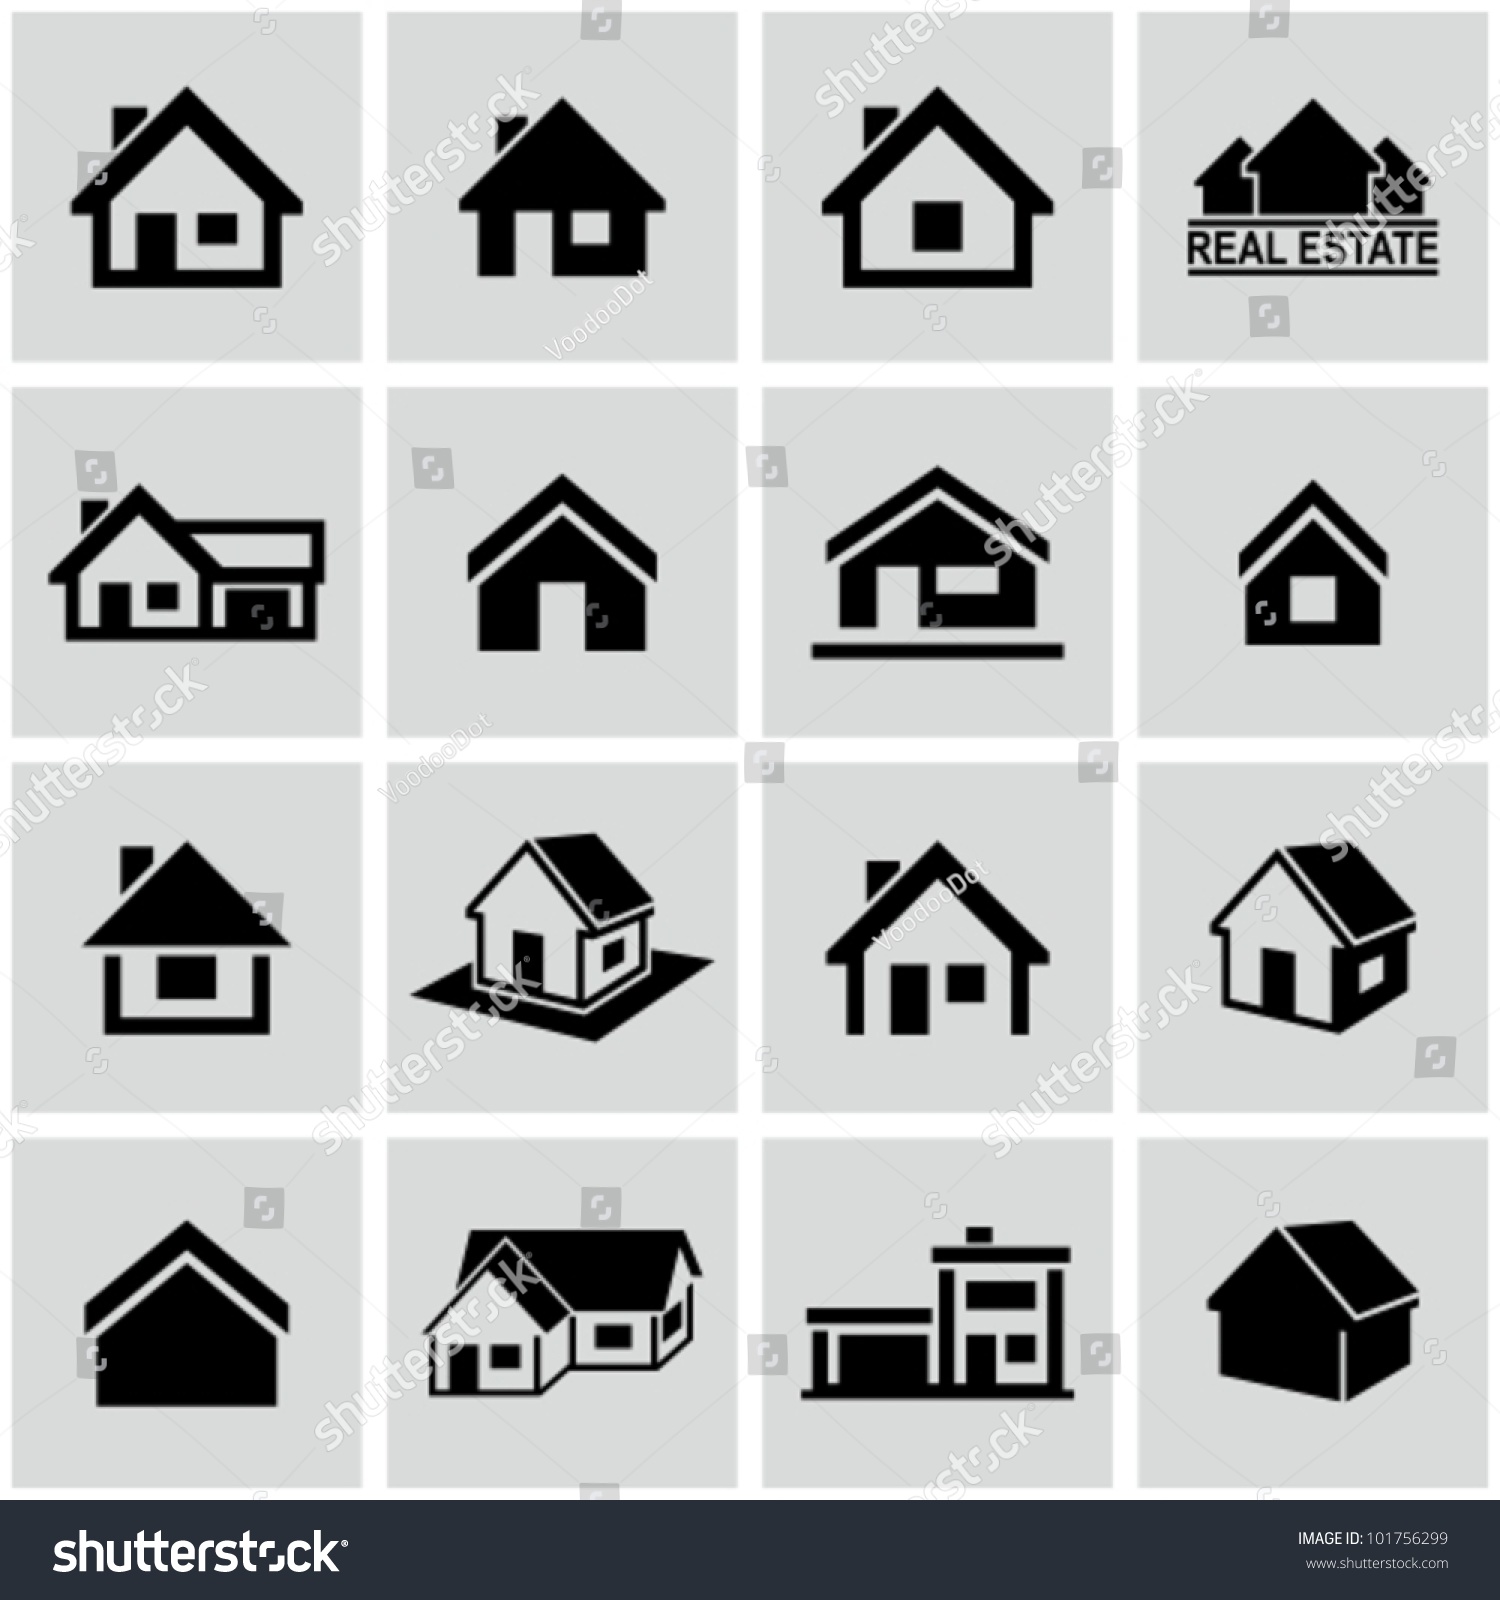 SVG of Houses icons set. Real estate. svg